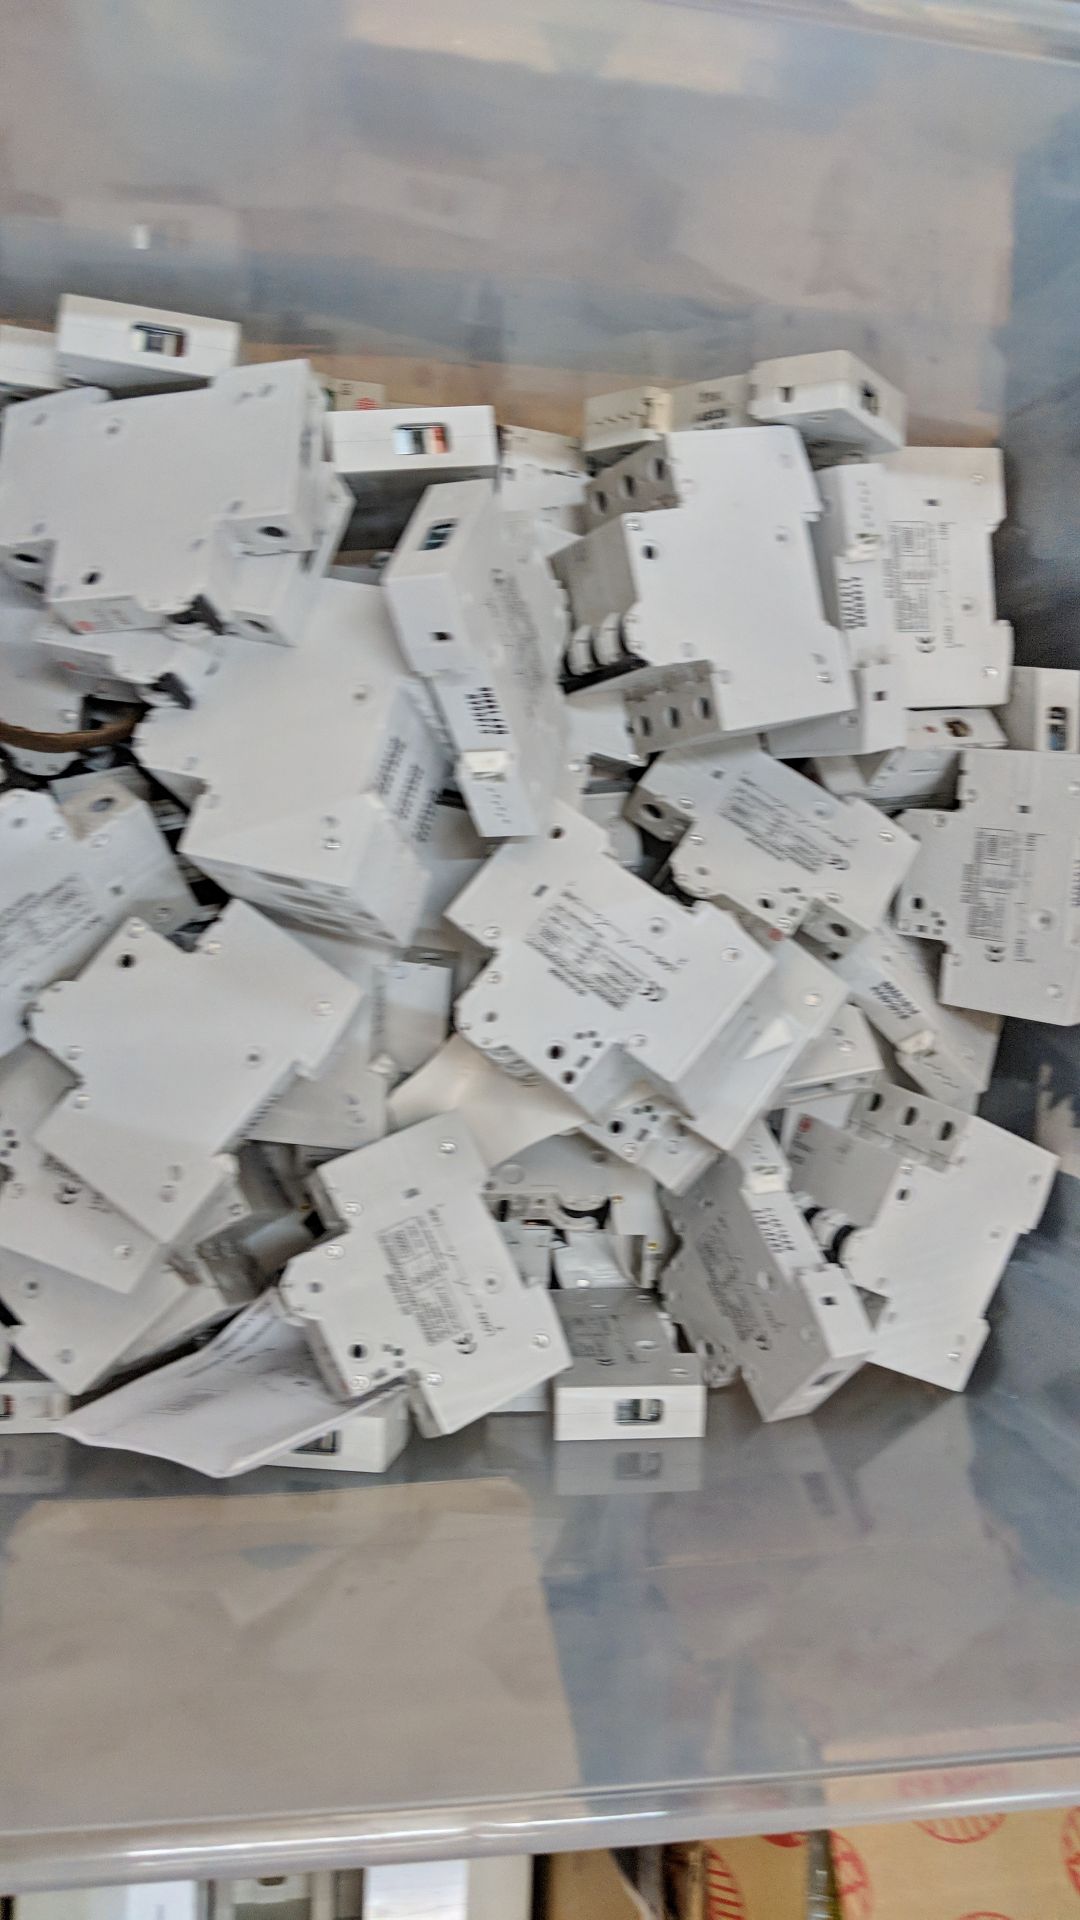 Contents of a crate consisting of a large quantity of Wylex MCB and other fuse switches - crate - Image 5 of 5